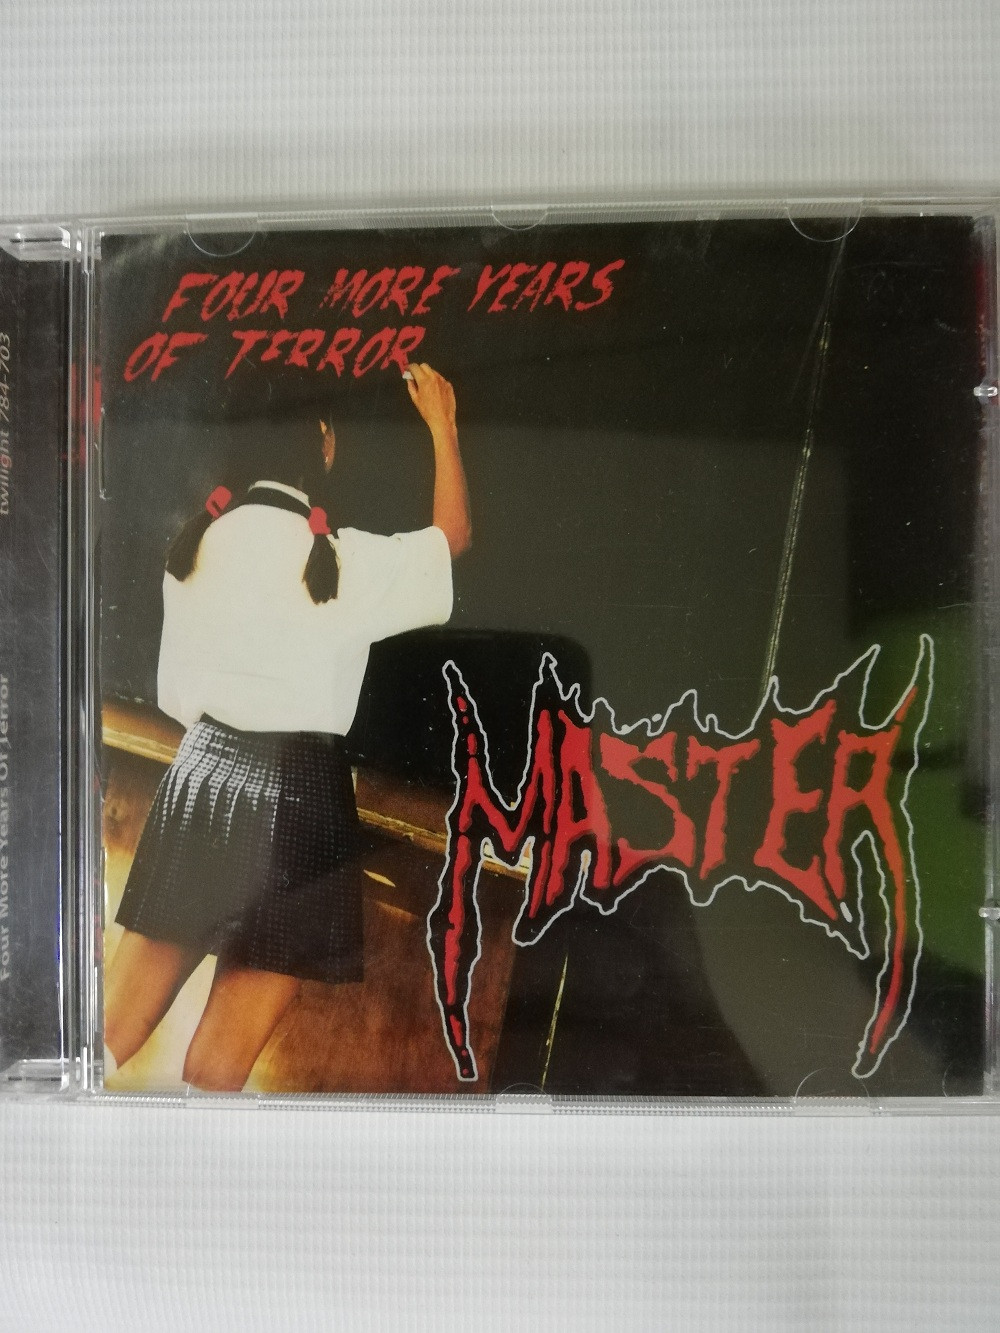 Imagen CD MASTER - FOUR MORE YEARS OF TERROR 1